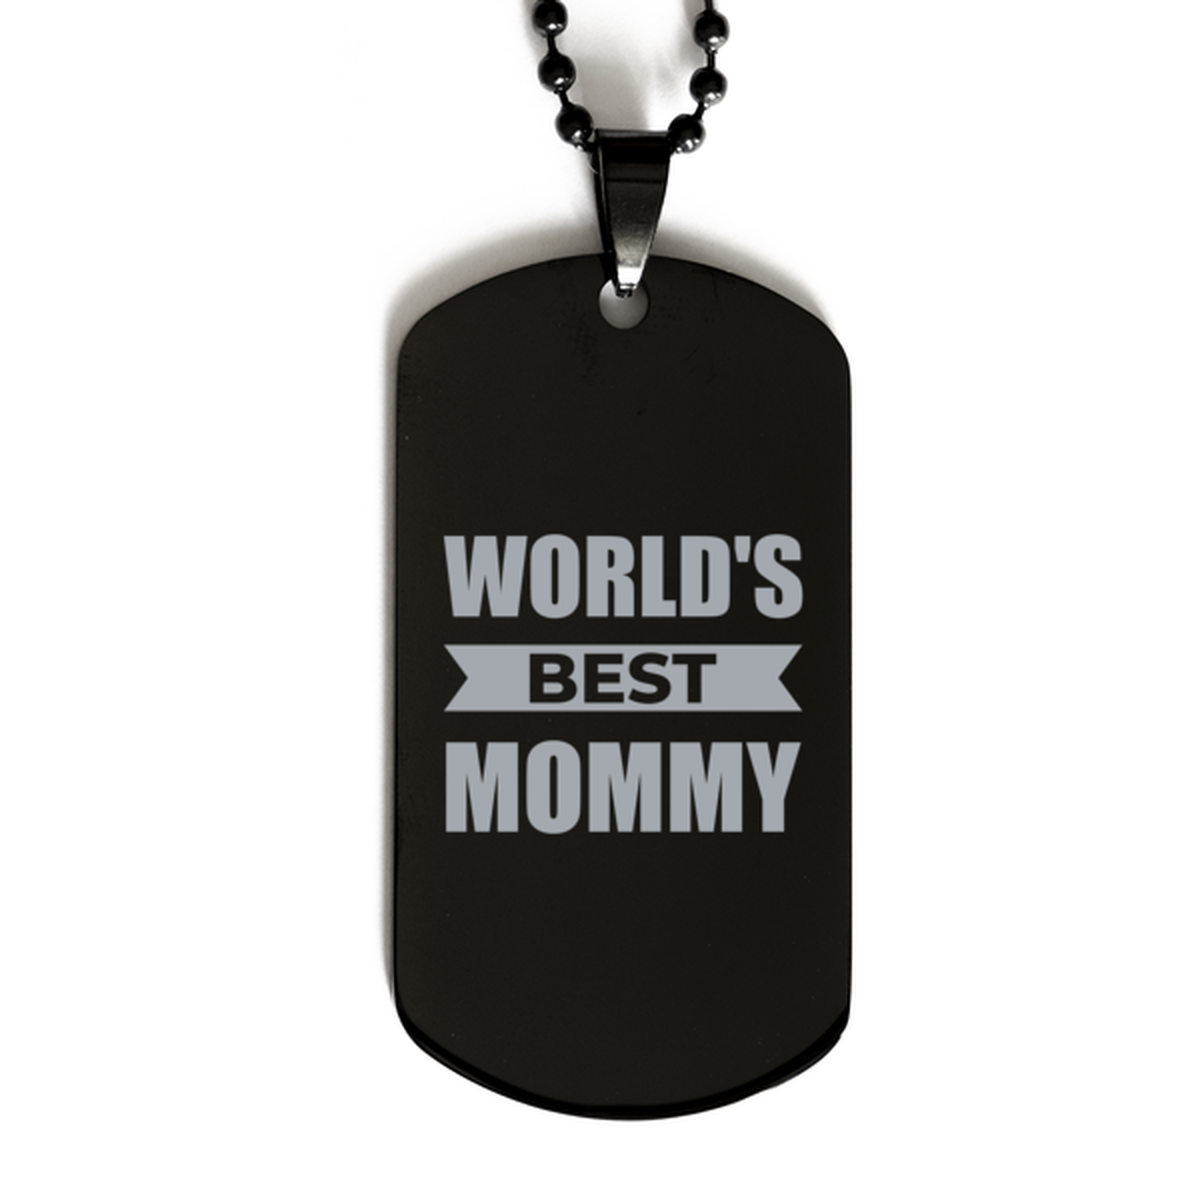 Worlds Best Mommy Gifts, Funny Black Engraved Dog Tag For Mommy, Birthday Presents For Women